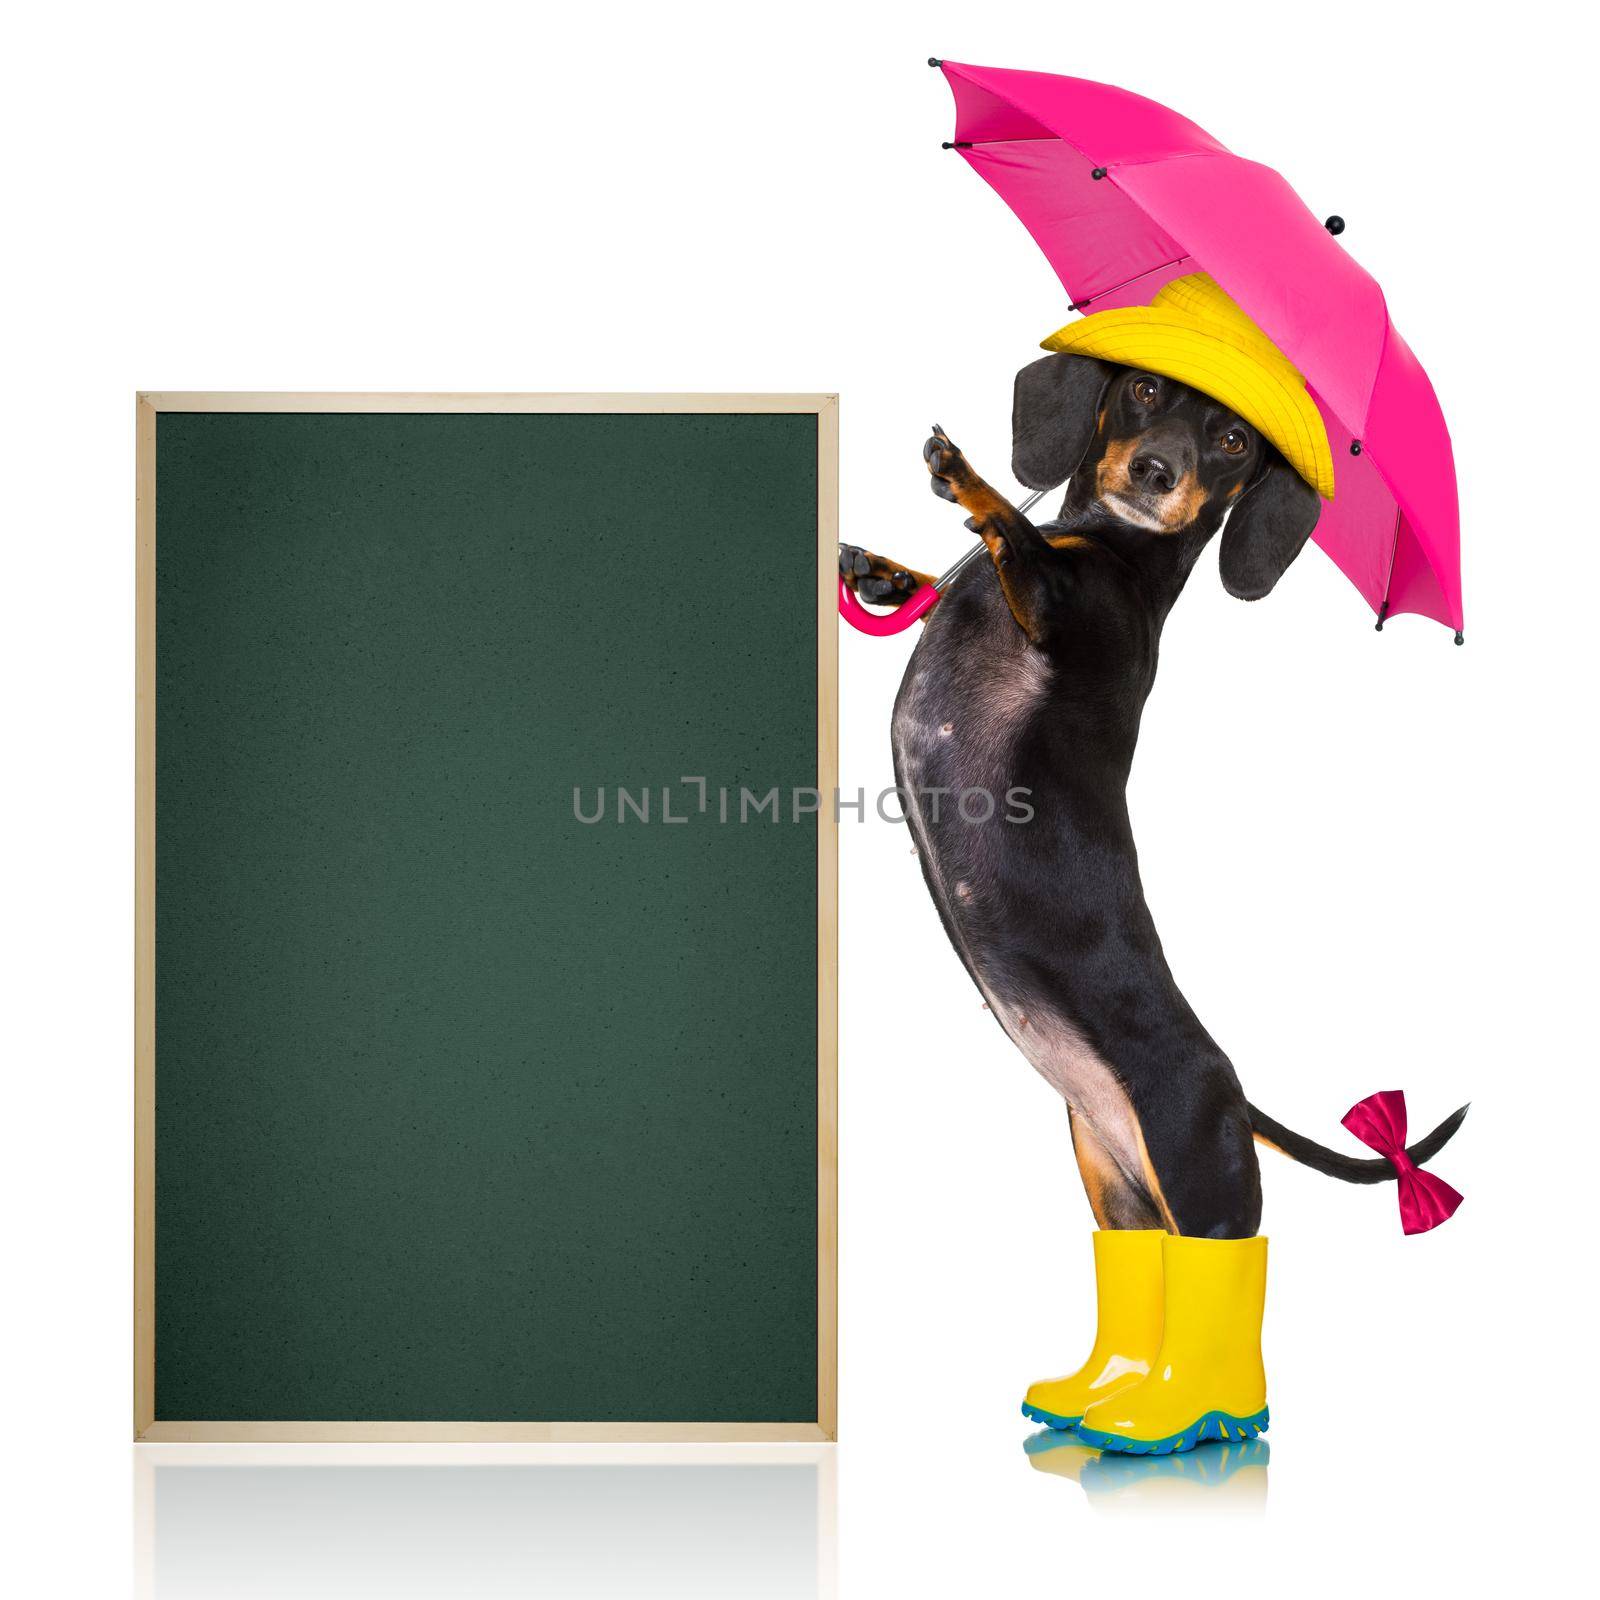 sausage dachshund dog , ready and  prepared for rain or bad weather with rubber boots , hat and umbrella , isolated on white background, blackboard or banner placard to the side